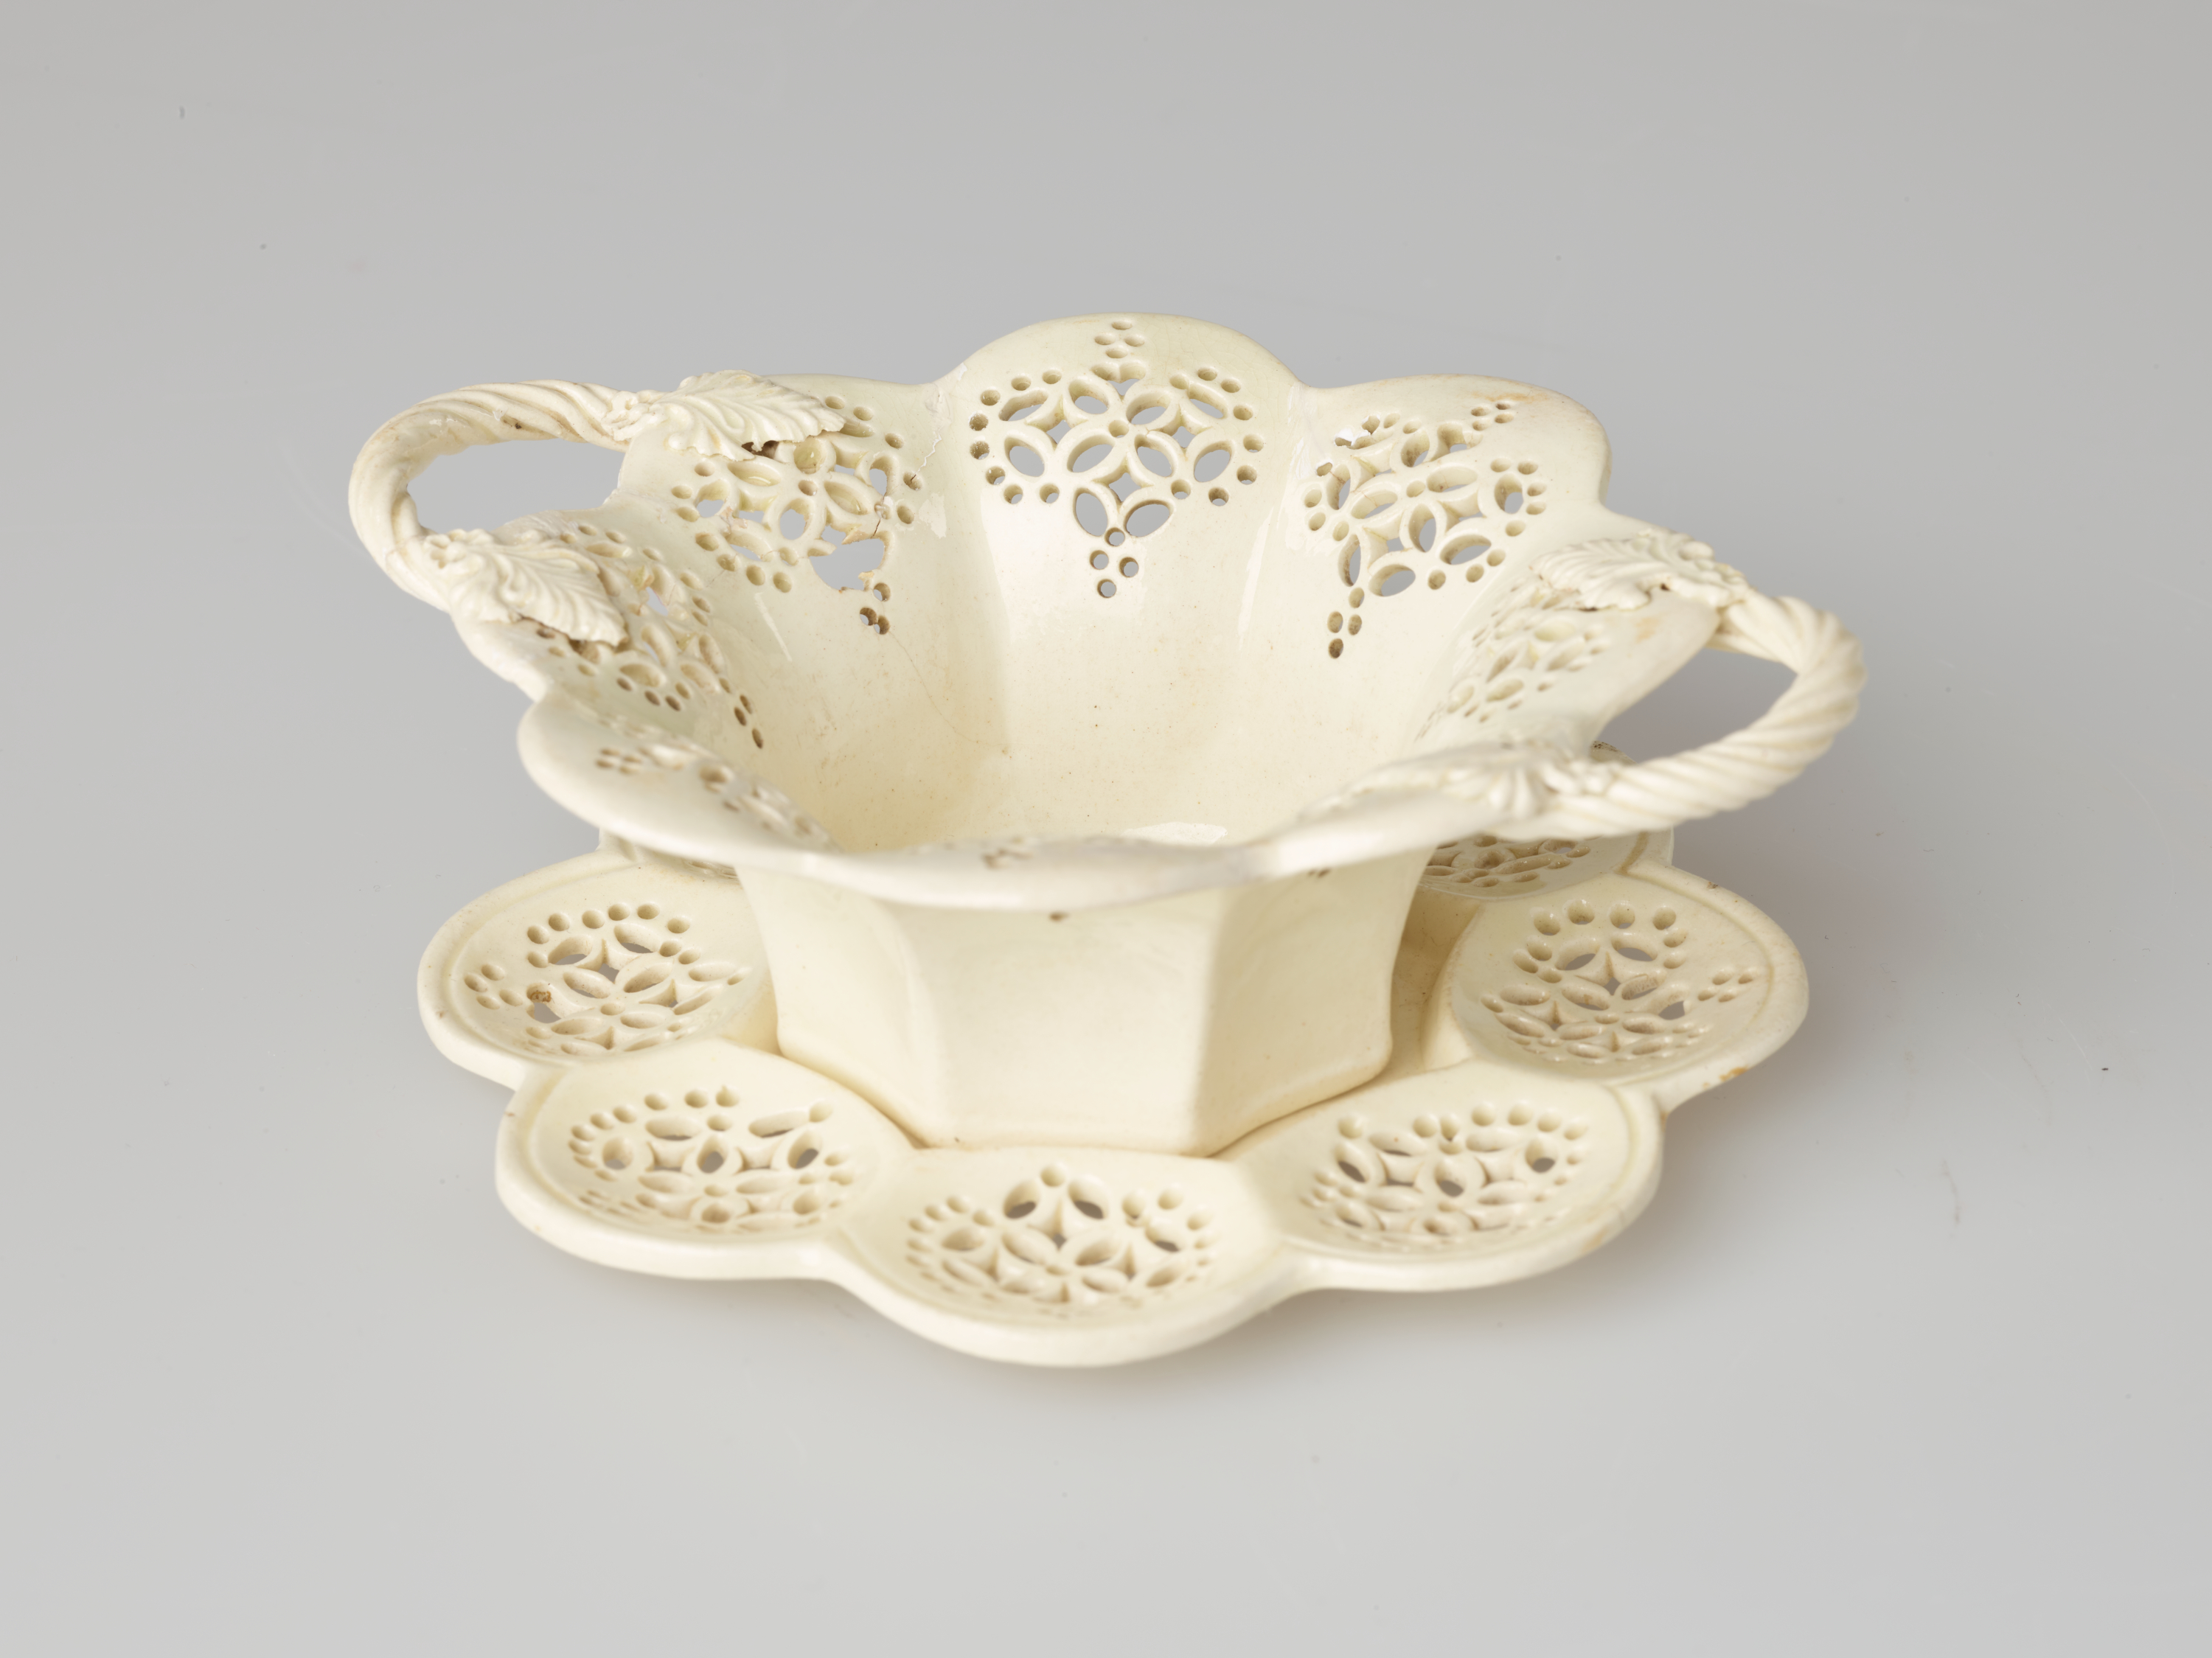 /A%20creamware%20sweetmeat%20dish%20with%20swirled%20handles%20and%20lace-like%20decorations%20cut%20into%20the%20octagonal%20vessel%20that%20is%20sitting%20on%20a%20matching%20tray.